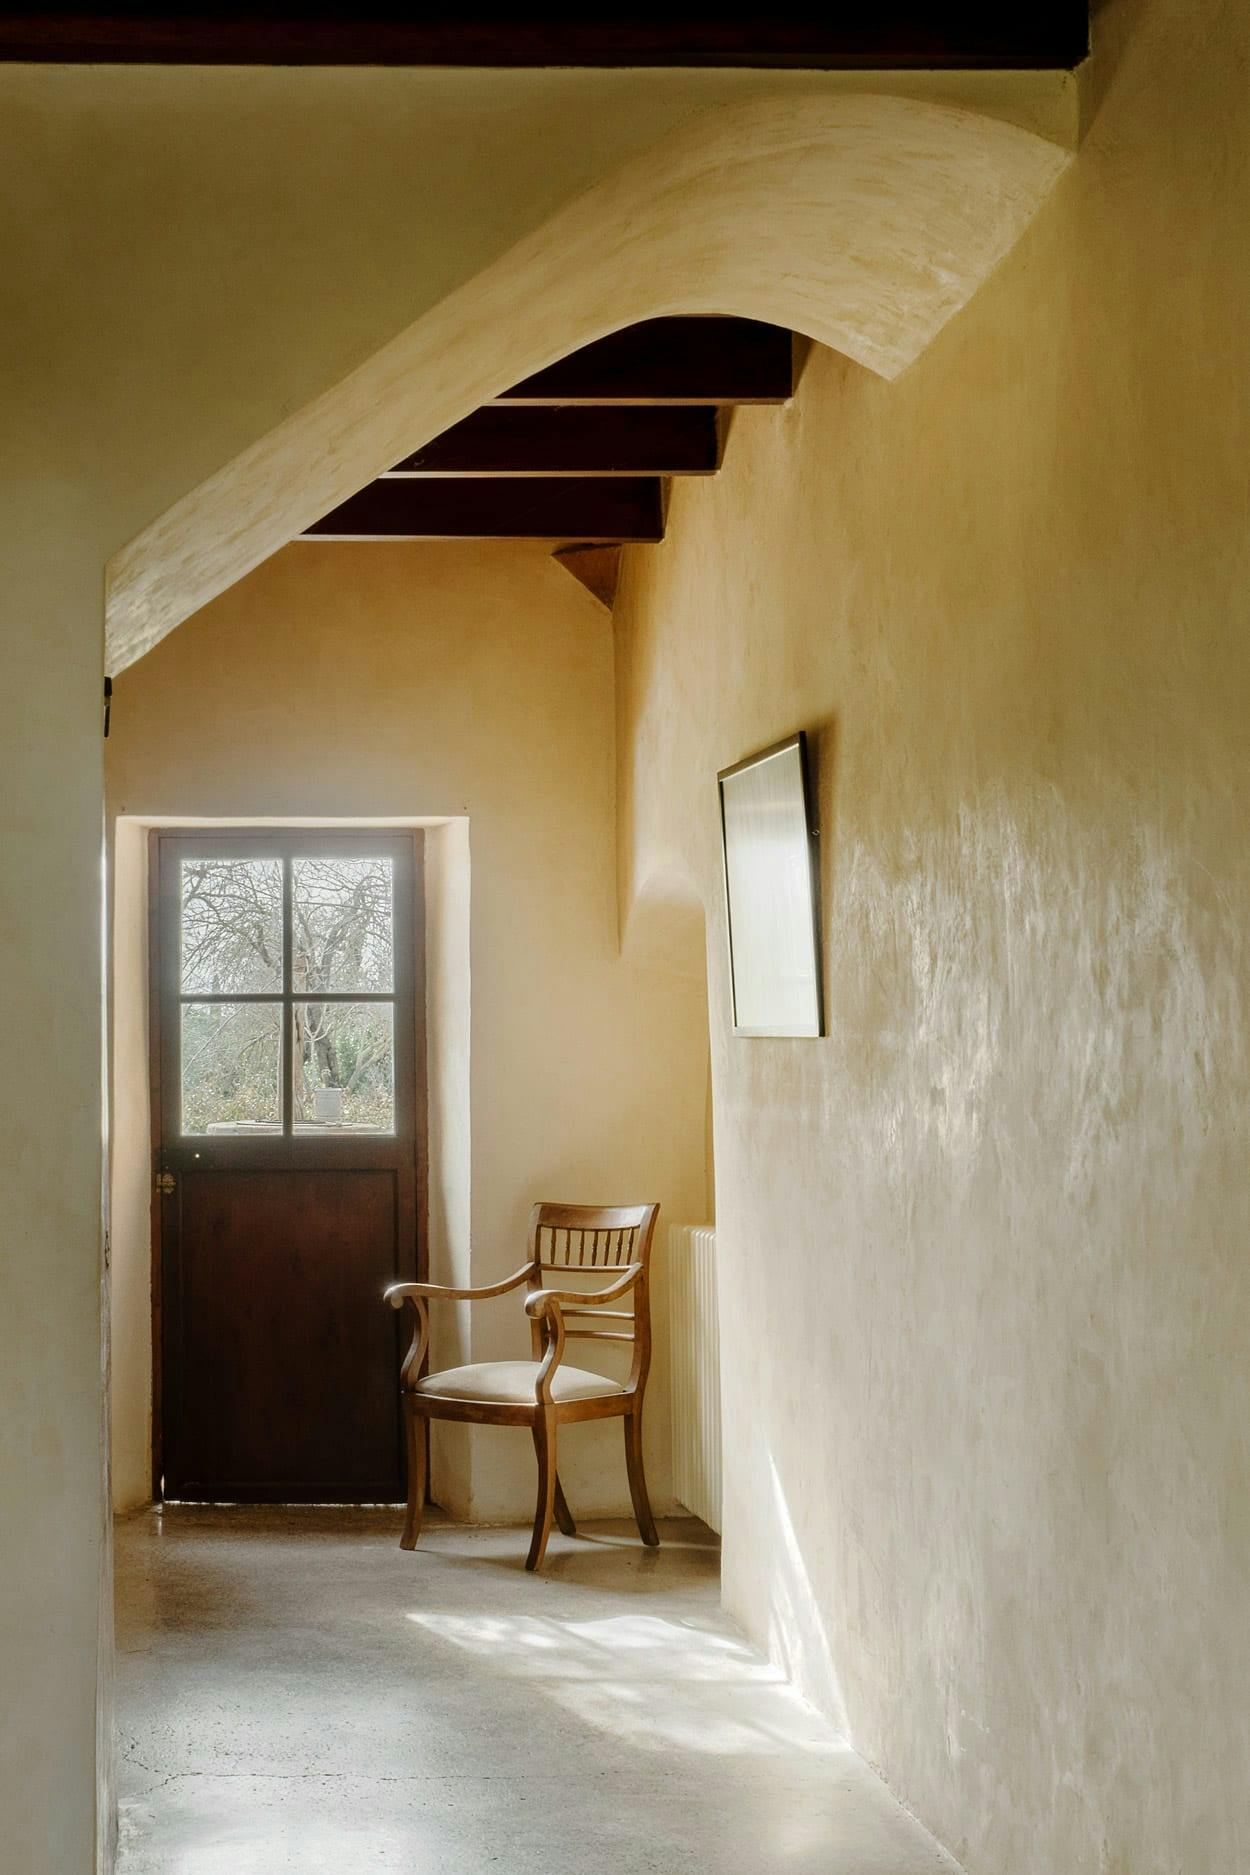 A chair is sitting in a room with a window, and the room is painted in a light yellow color.